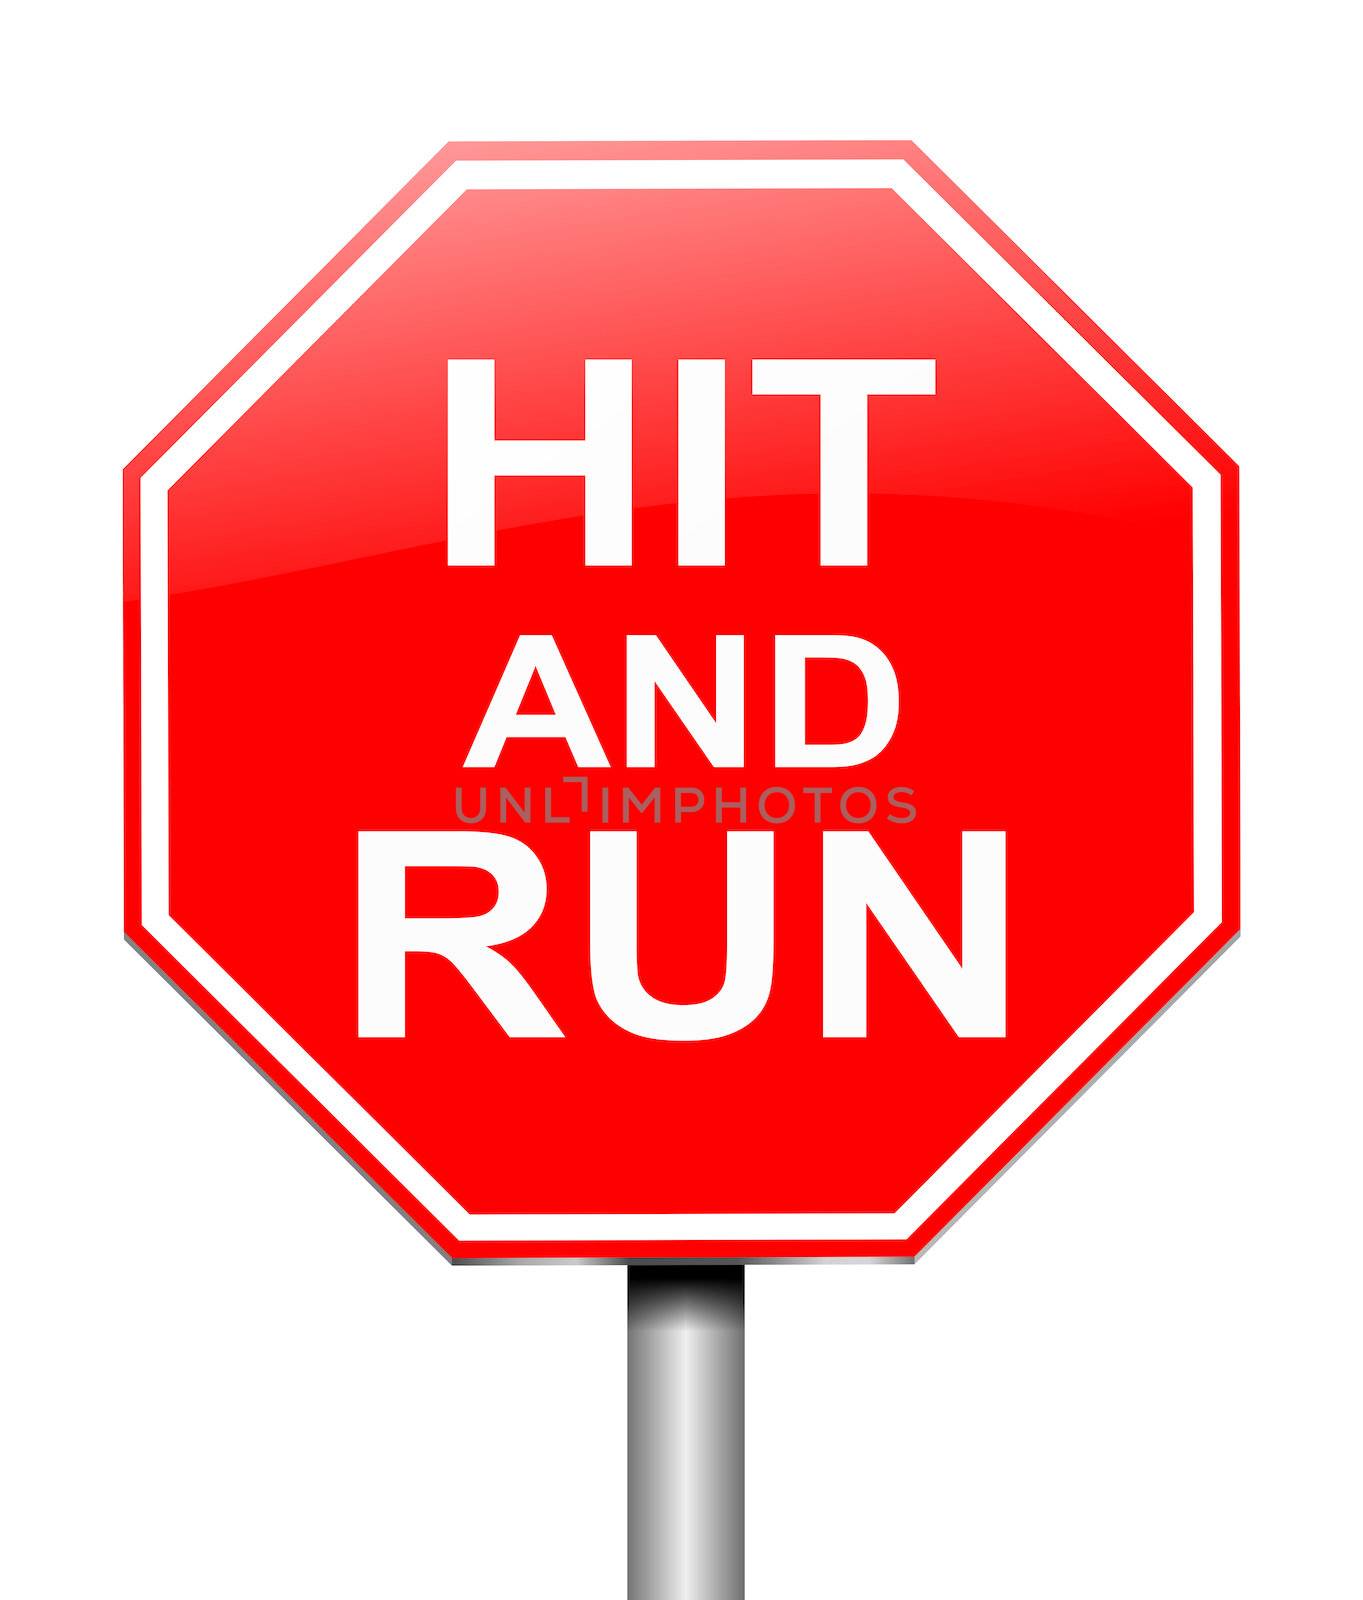 Illustration depicting a sign with a hit and run concept.